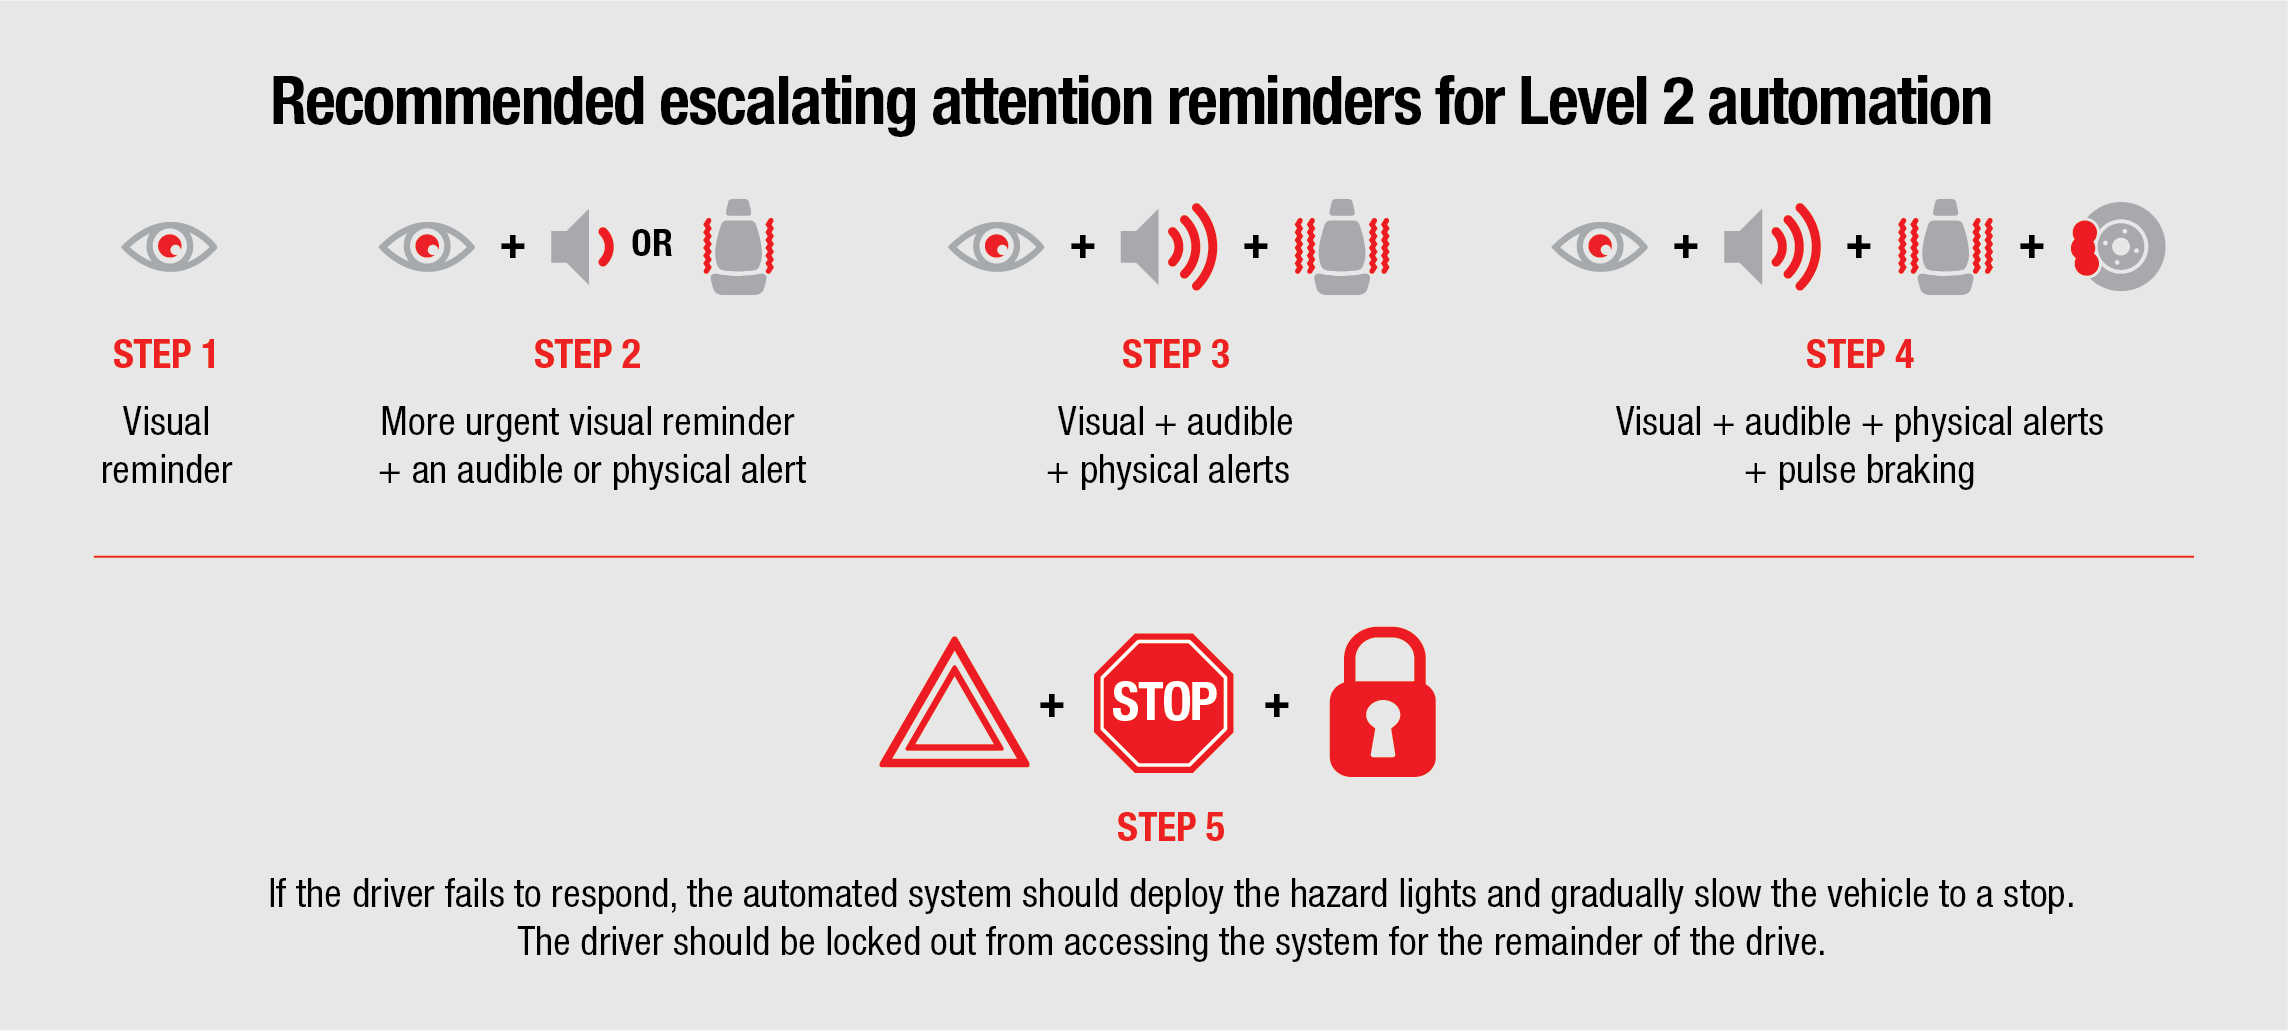 Recommended escalating attention reminders for Level 2 automation.